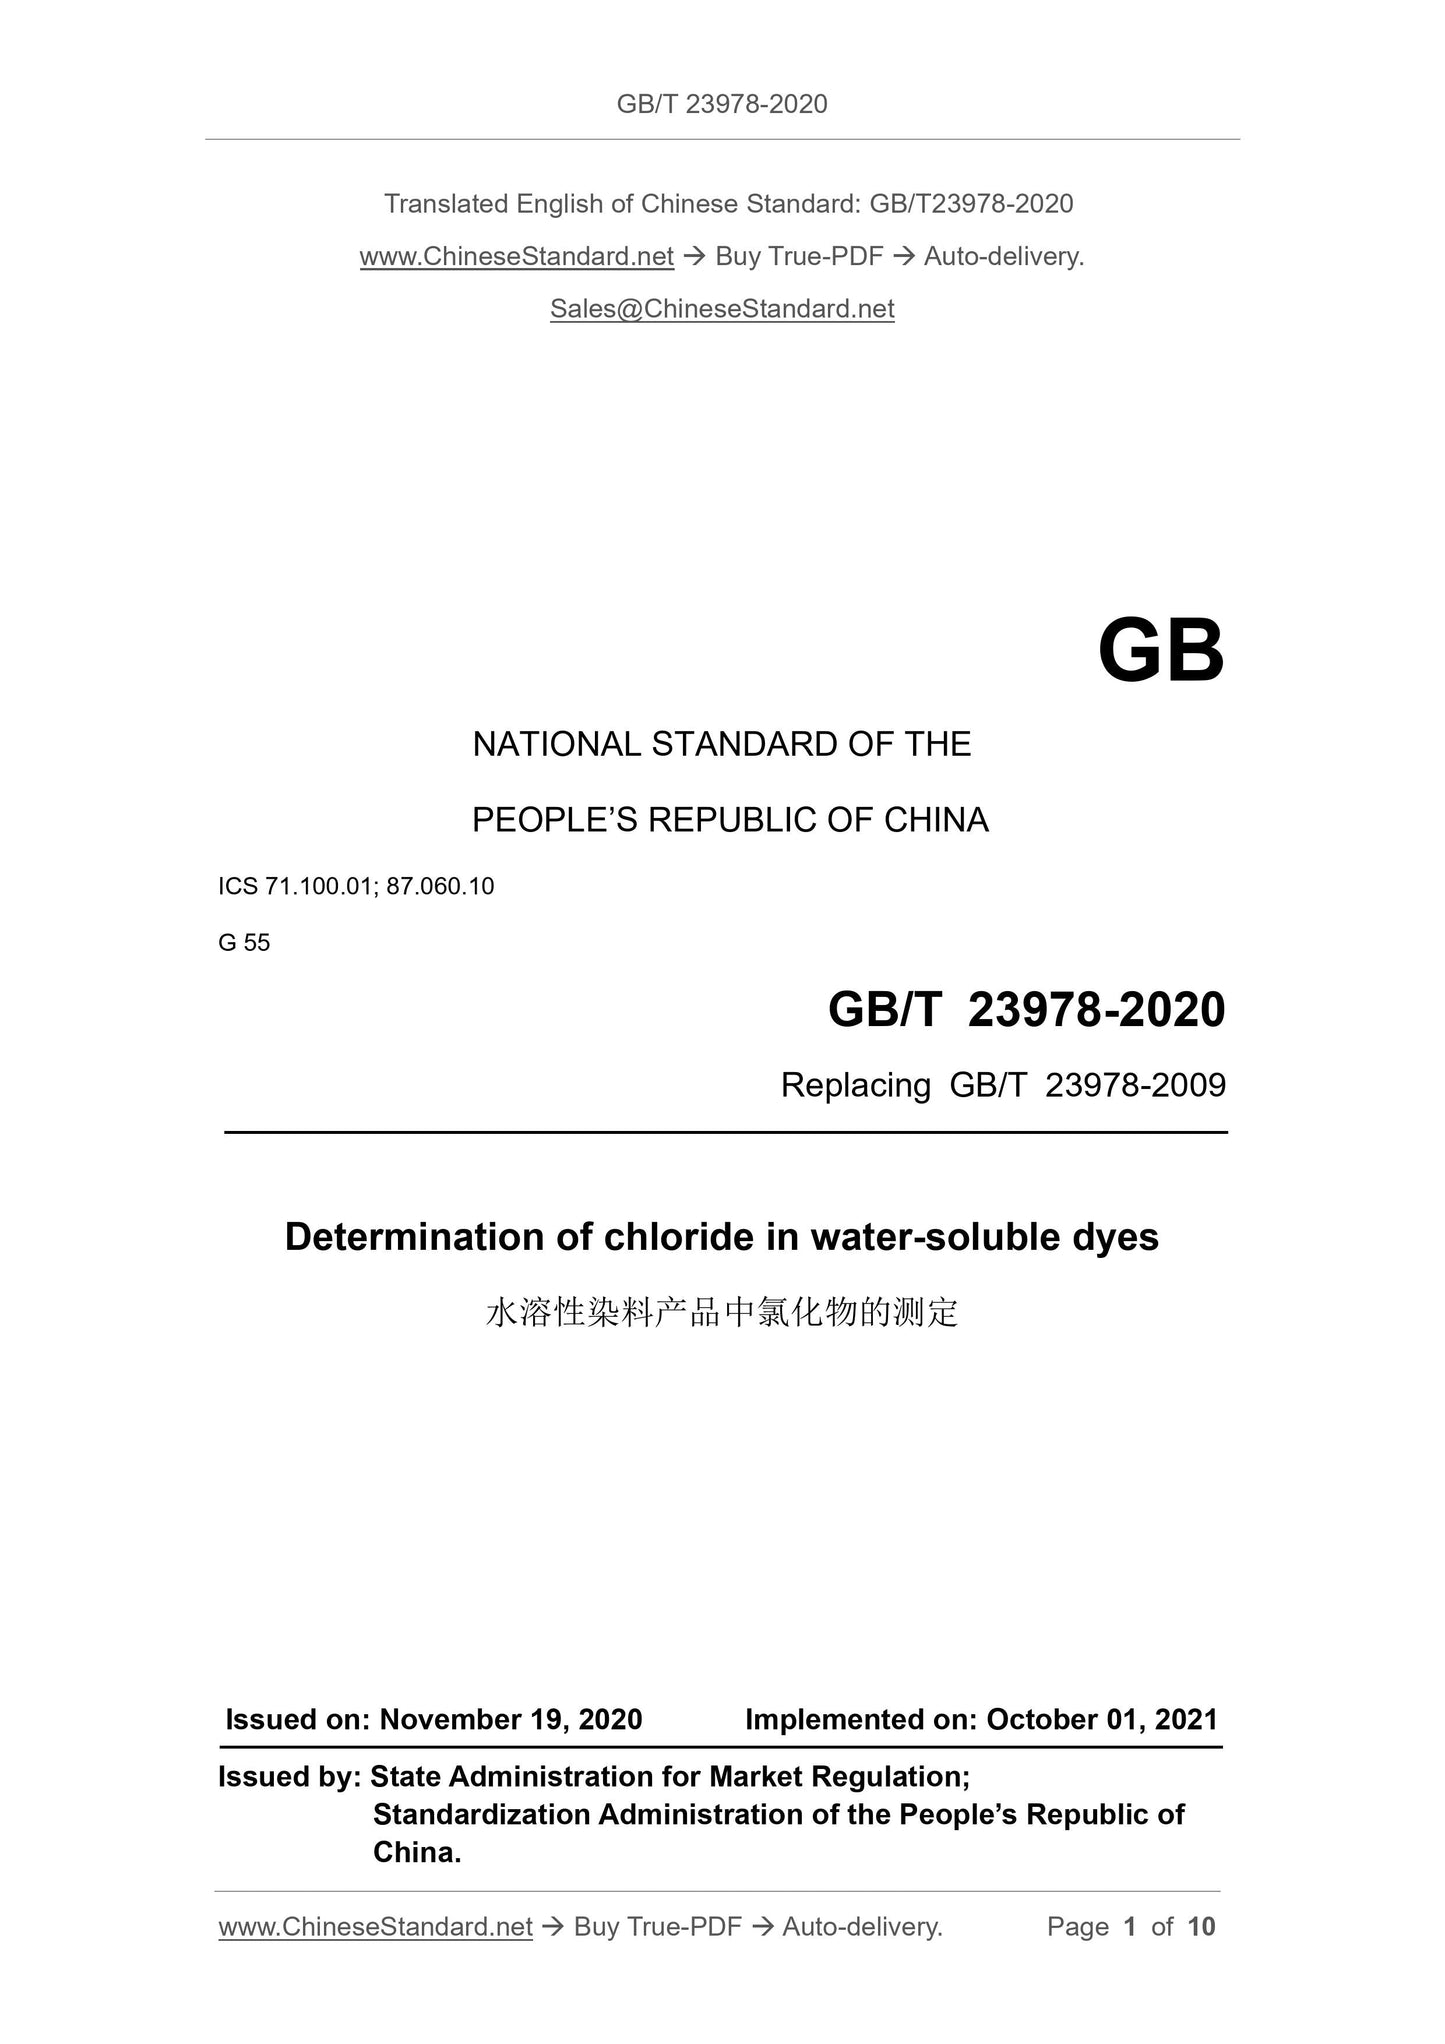 GB/T 23978-2020 Page 1